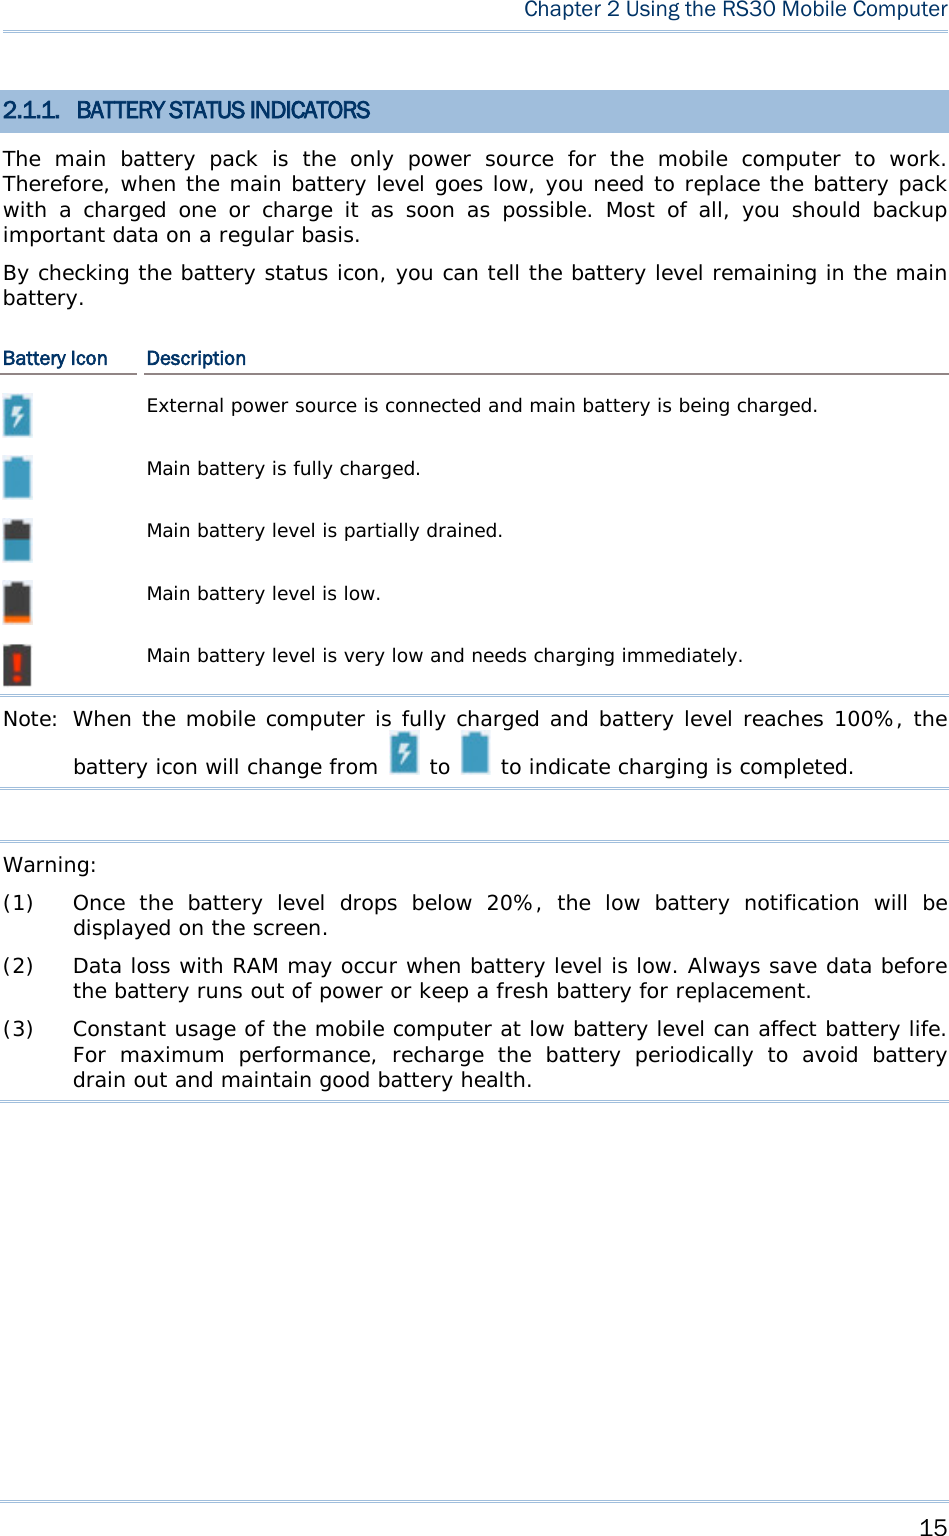  Chapter 2 Using the RS30 Mobile Computer  2.1.1. BATTERY STATUS INDICATORS The  main  battery pack is the only power source for the mobile computer to work. Therefore, when the main battery level goes low, you need to replace the battery pack with a charged one or charge it as soon as possible. Most of all, you should backup important data on a regular basis. By checking the battery status icon, you can tell the battery level remaining in the main battery. Battery Icon Description  External power source is connected and main battery is being charged.  Main battery is fully charged.  Main battery level is partially drained.  Main battery level is low.  Main battery level is very low and needs charging immediately. Note: When the mobile computer is fully charged and battery level reaches 100%, the battery icon will change from   to   to indicate charging is completed.  Warning: (1) Once the battery level drops below 20%,  the low battery notification will be displayed on the screen. (2) Data loss with RAM may occur when battery level is low. Always save data before the battery runs out of power or keep a fresh battery for replacement. (3) Constant usage of the mobile computer at low battery level can affect battery life. For maximum performance, recharge the battery periodically to avoid battery drain out and maintain good battery health.      15 